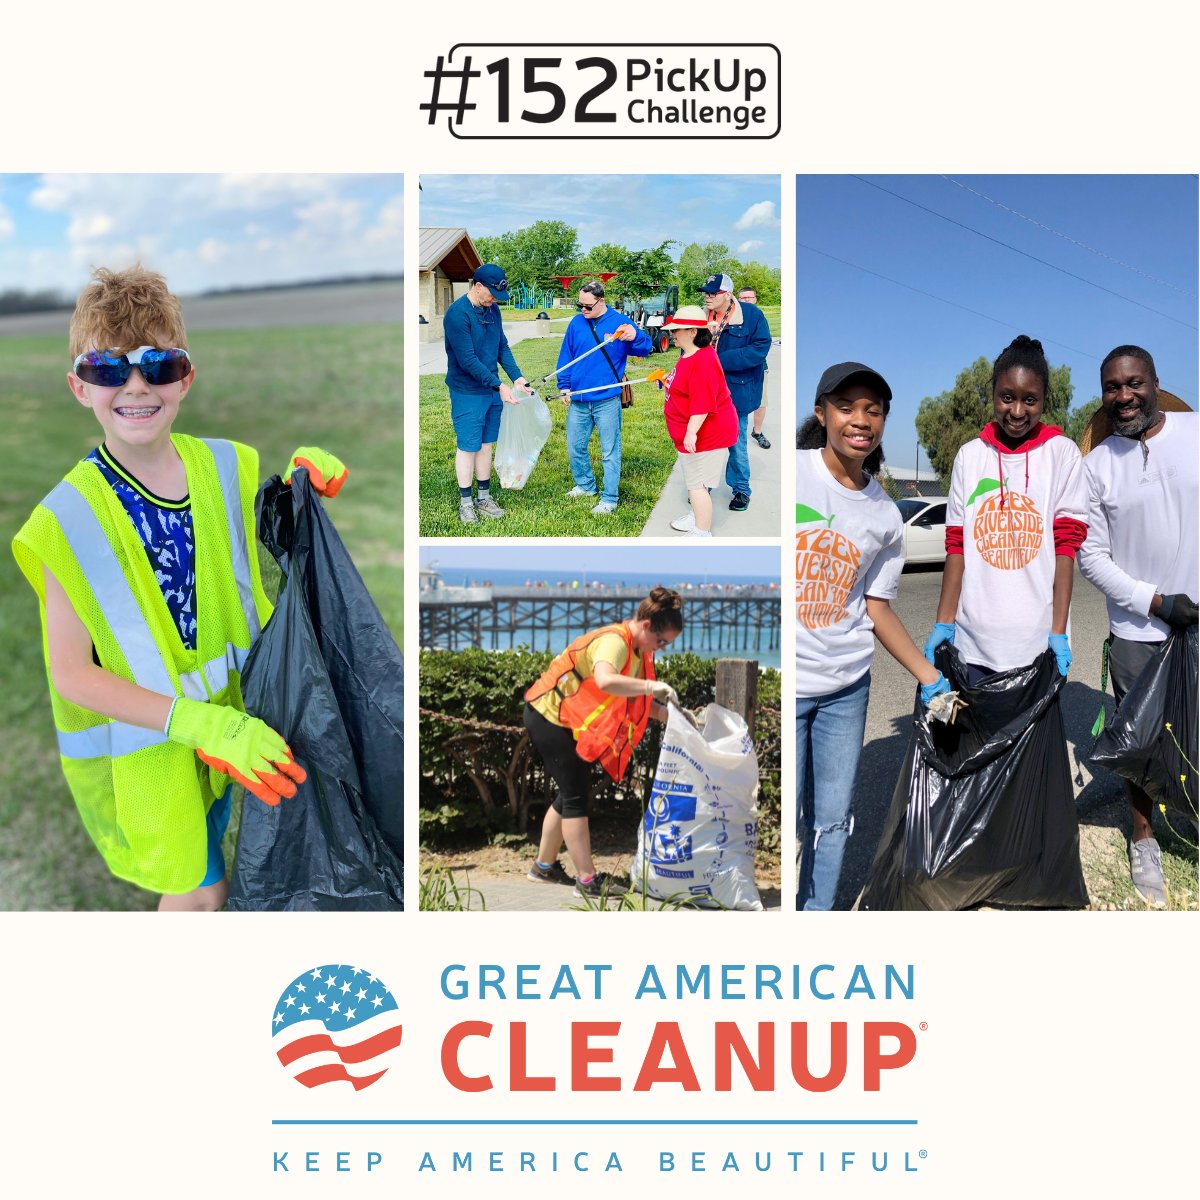 Did you know? If everyone picked up 152 pieces of trash, we’d have a litter-free America. 🌱 #DoBeautifulThings this weekend and join the #152PickUpChallenge during the 2024 #GreatAmericanCleanup! Sign up now and tag a friend who should join you 👯 bit.ly/3T5N8ZT